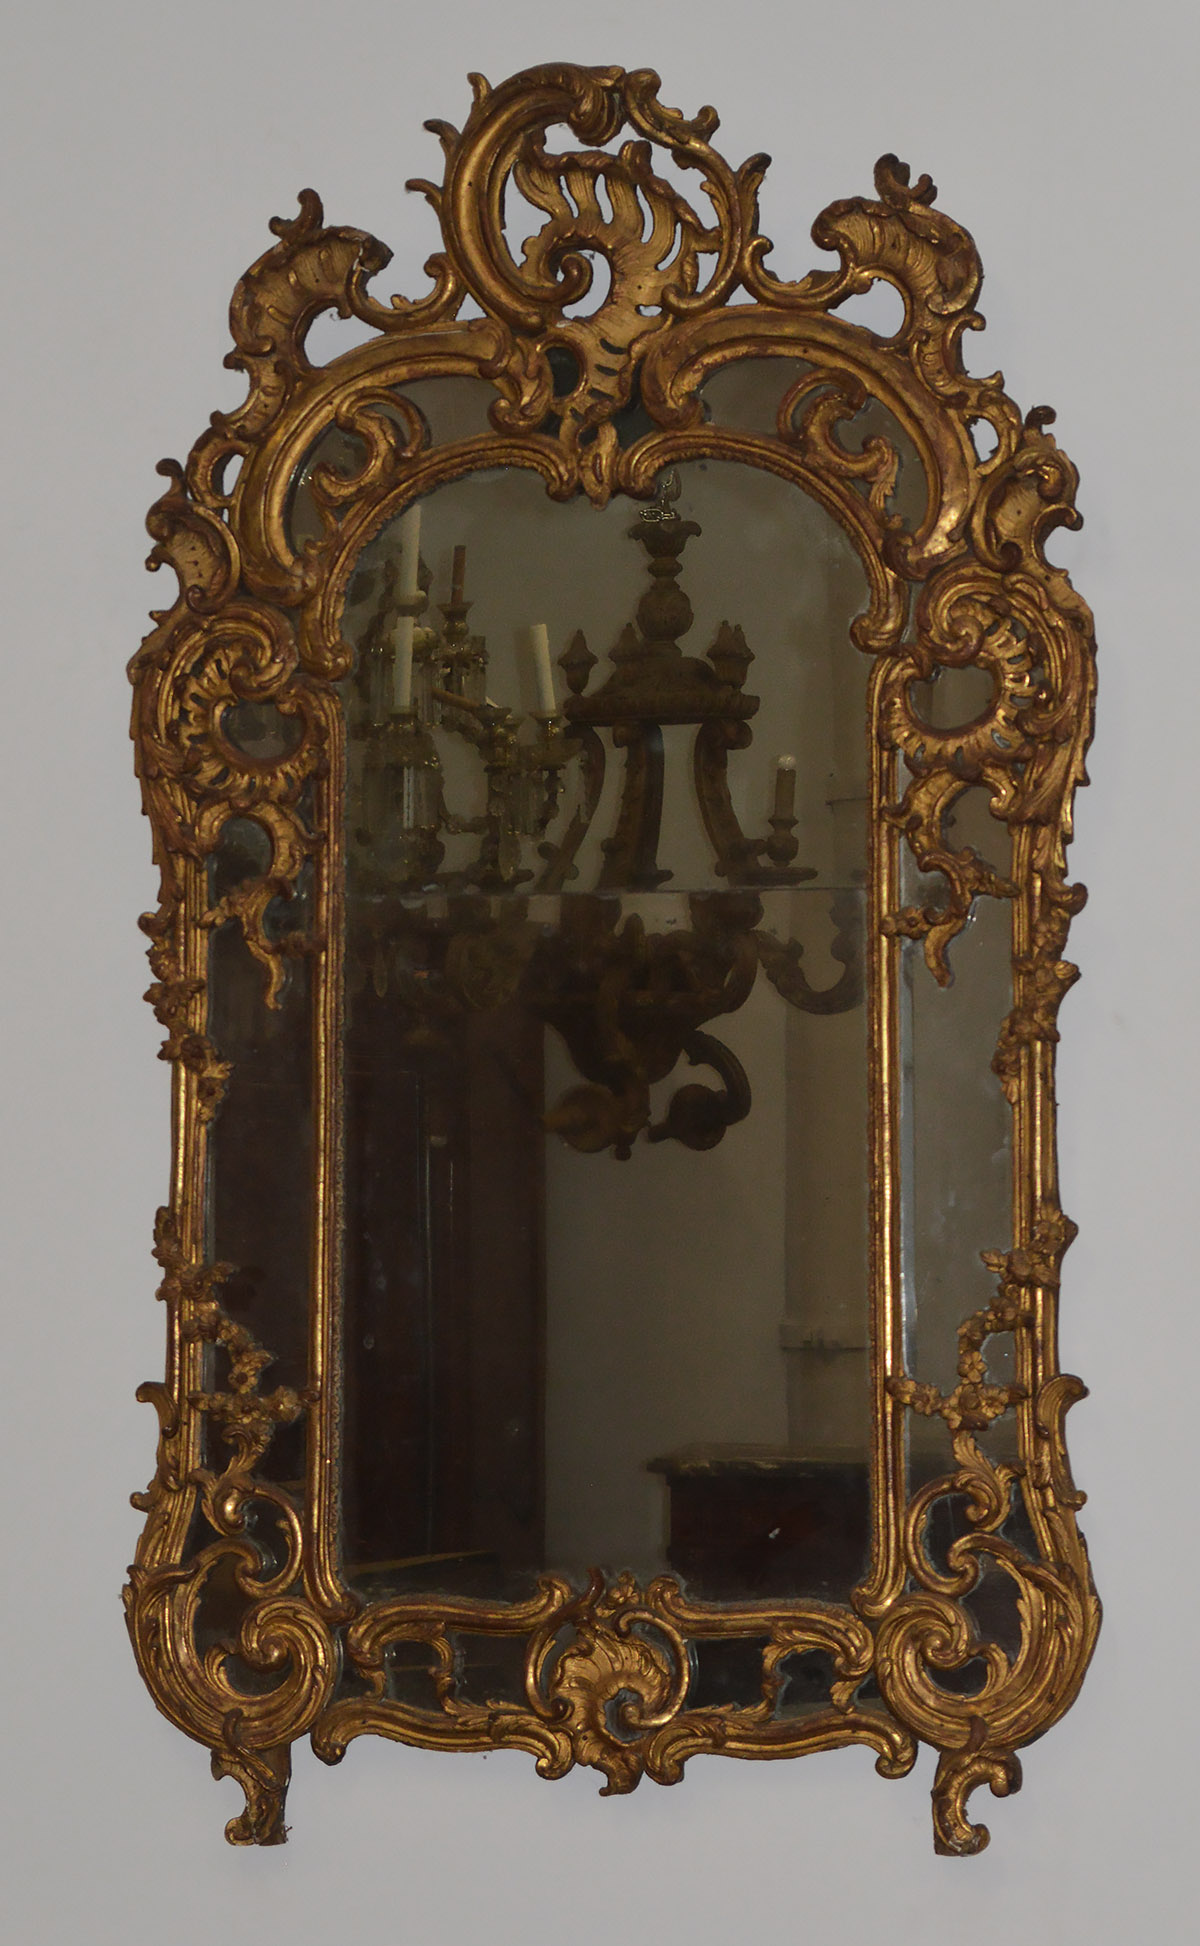 Very fine, French, early Louis XV period mirror